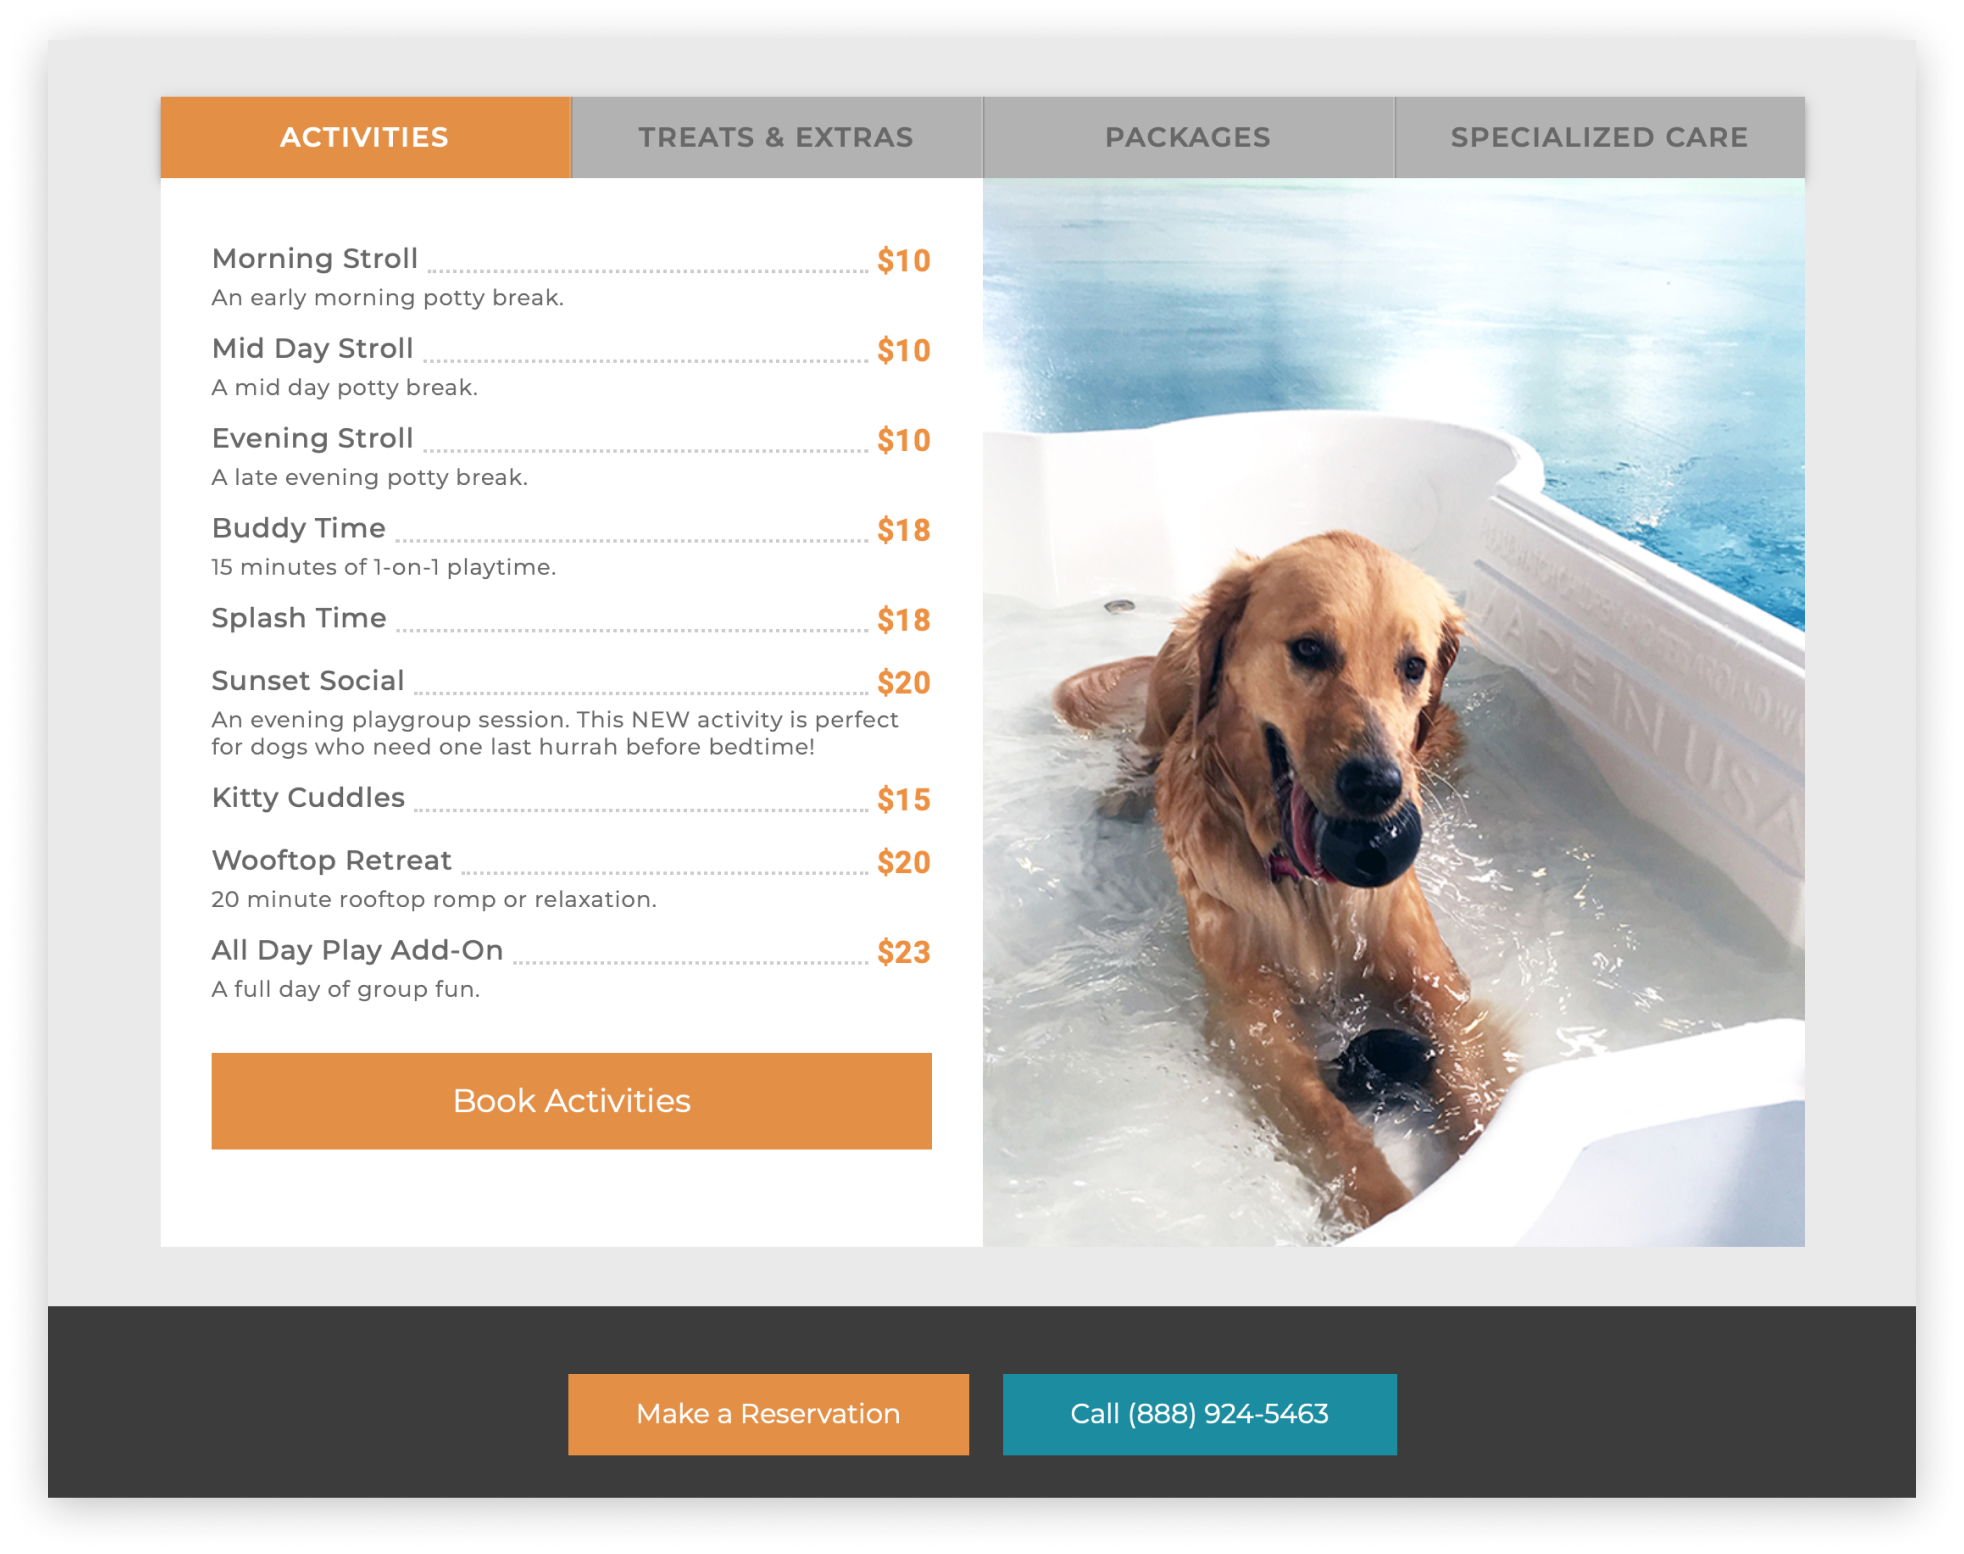 Wag hotel website - menu and picture of a dog in the pool. 